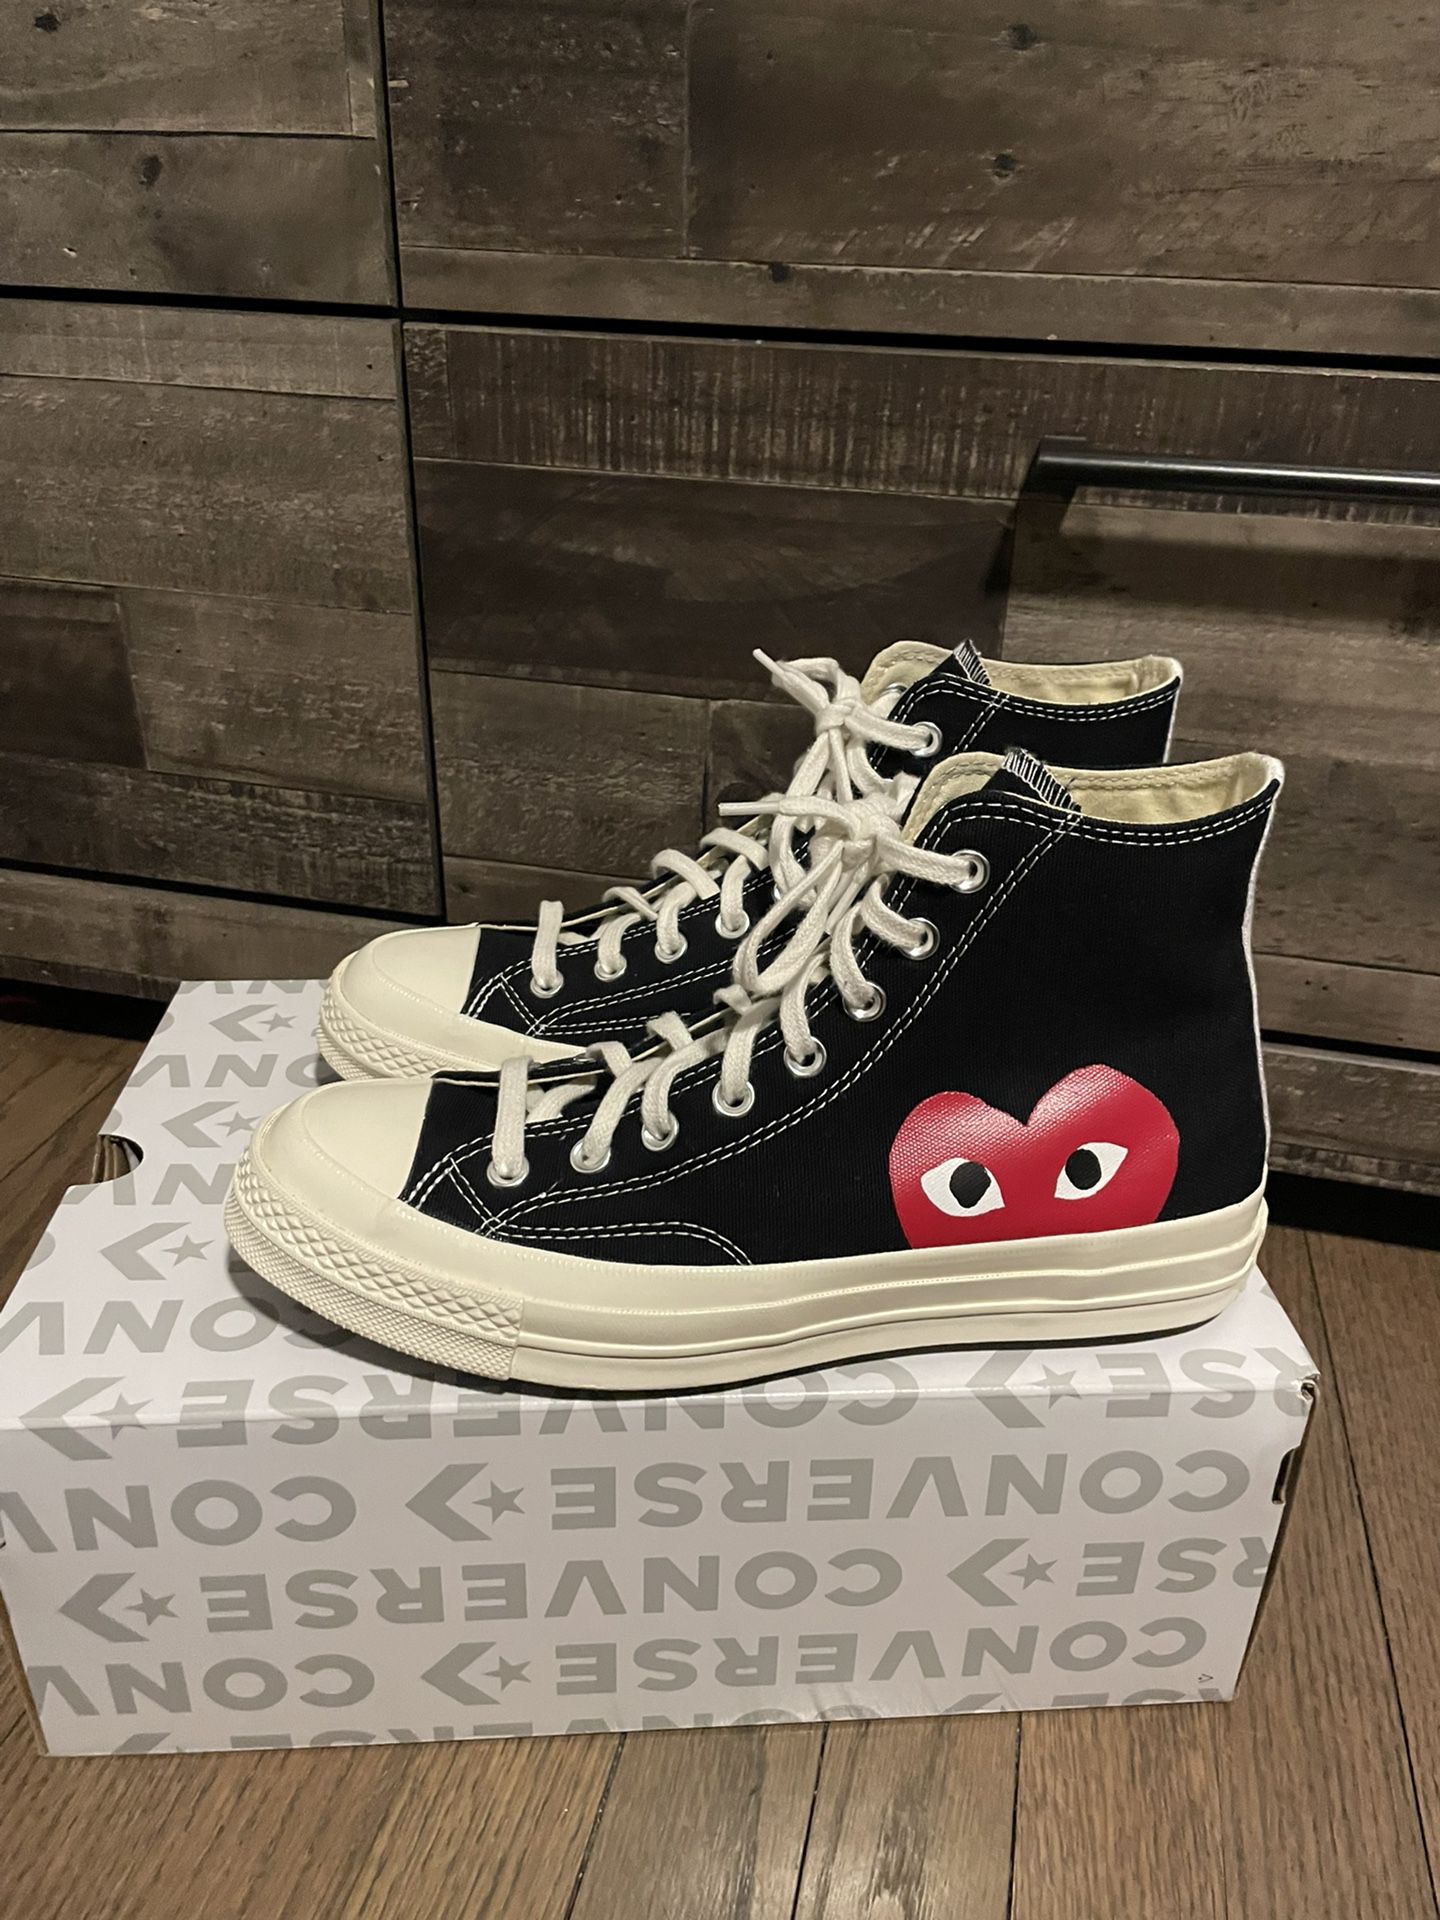 Lade være med Styring Ark Size 8 - Converse Chuck Taylor All Star High x Comme des Garcons Play 2015  for Sale in Merrionett Pk, IL - OfferUp